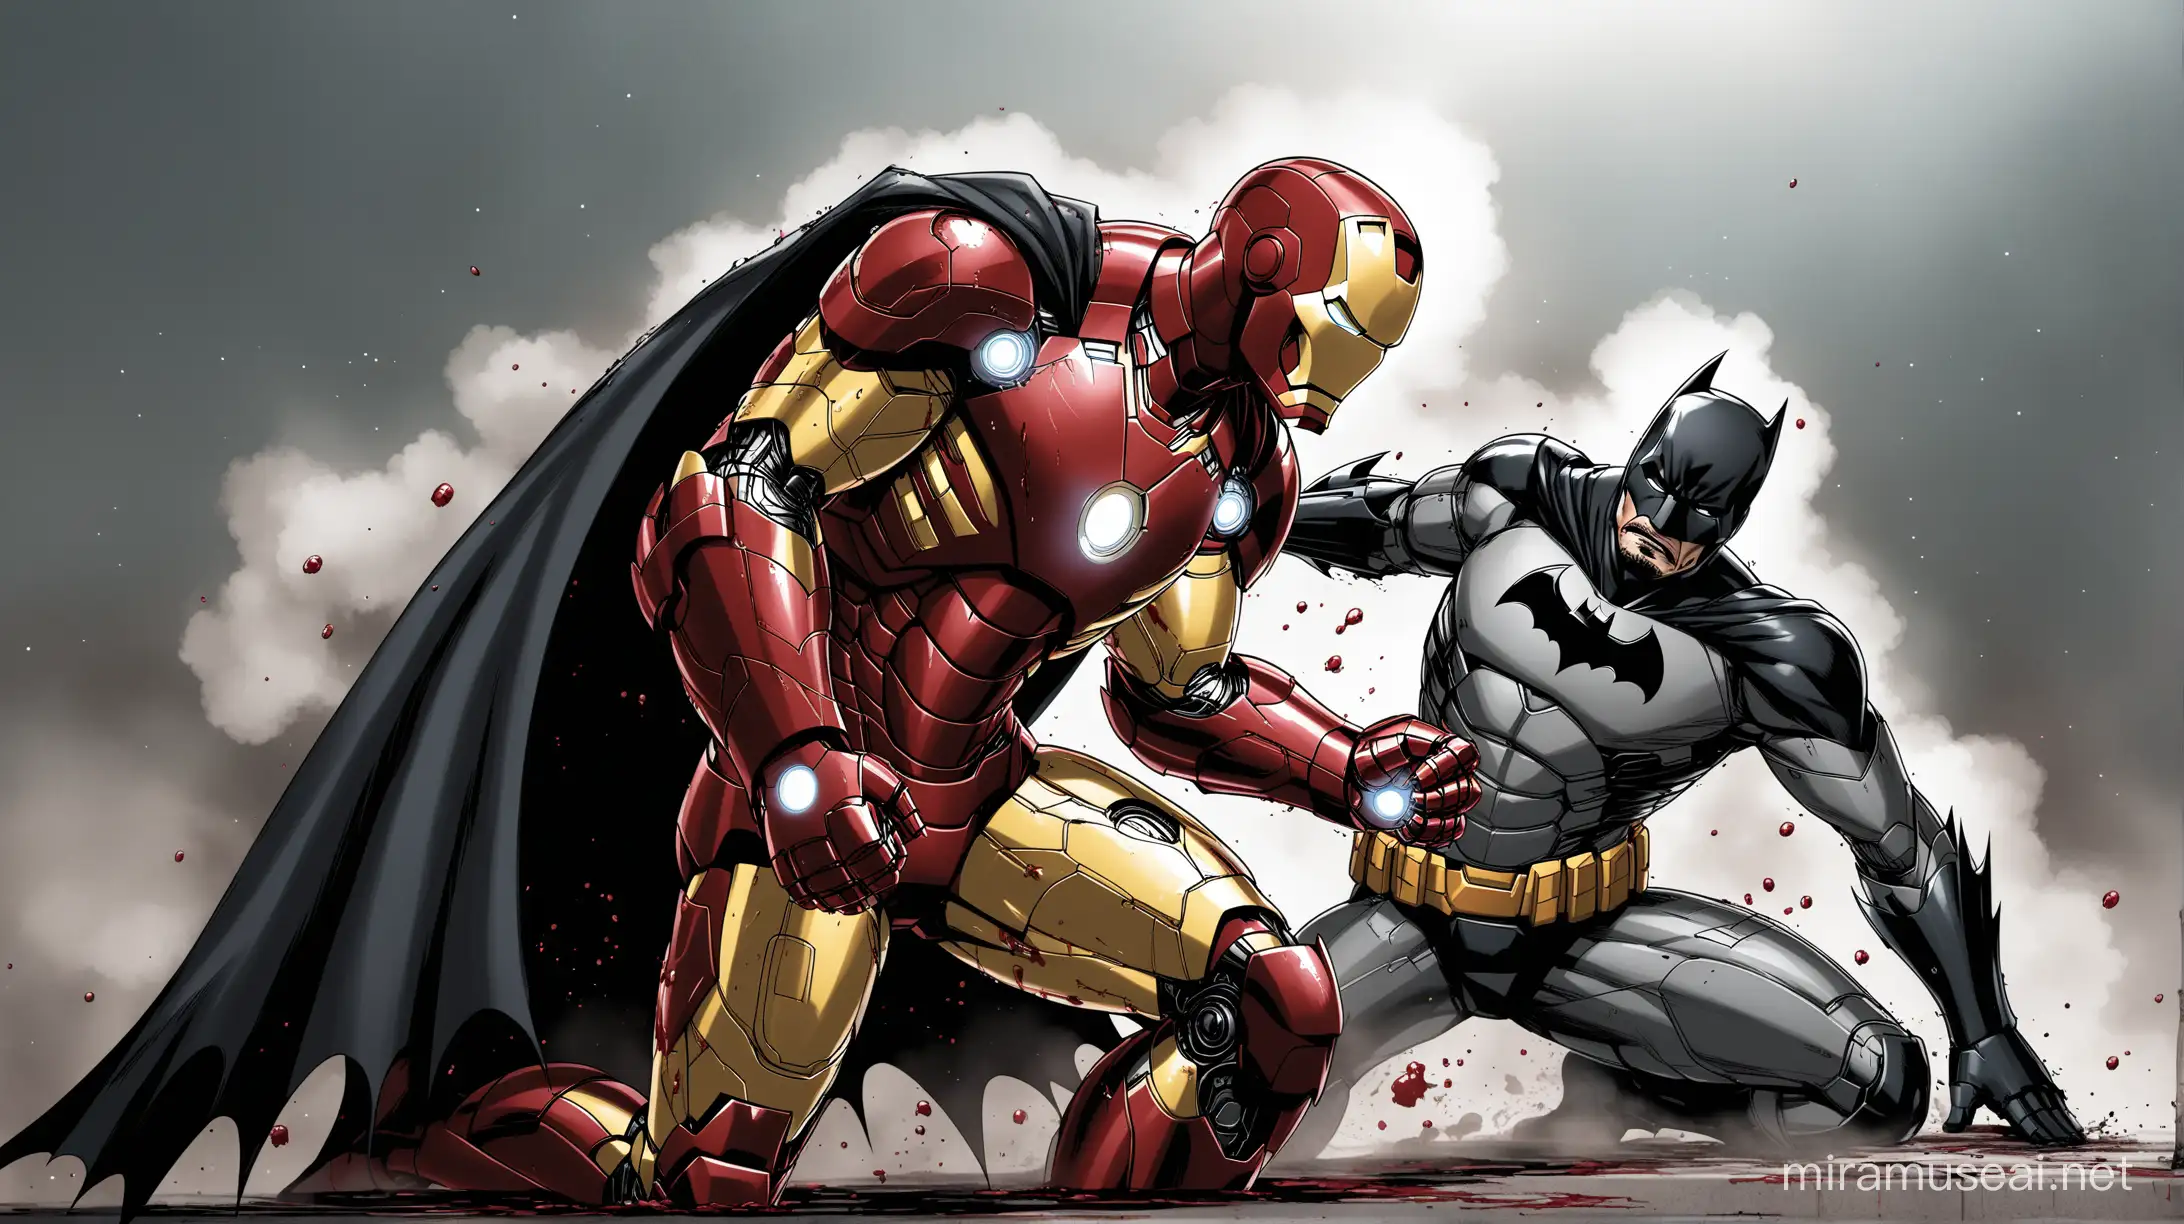 Exhausted Iron Man and Batman Engage in a Brutal Battle